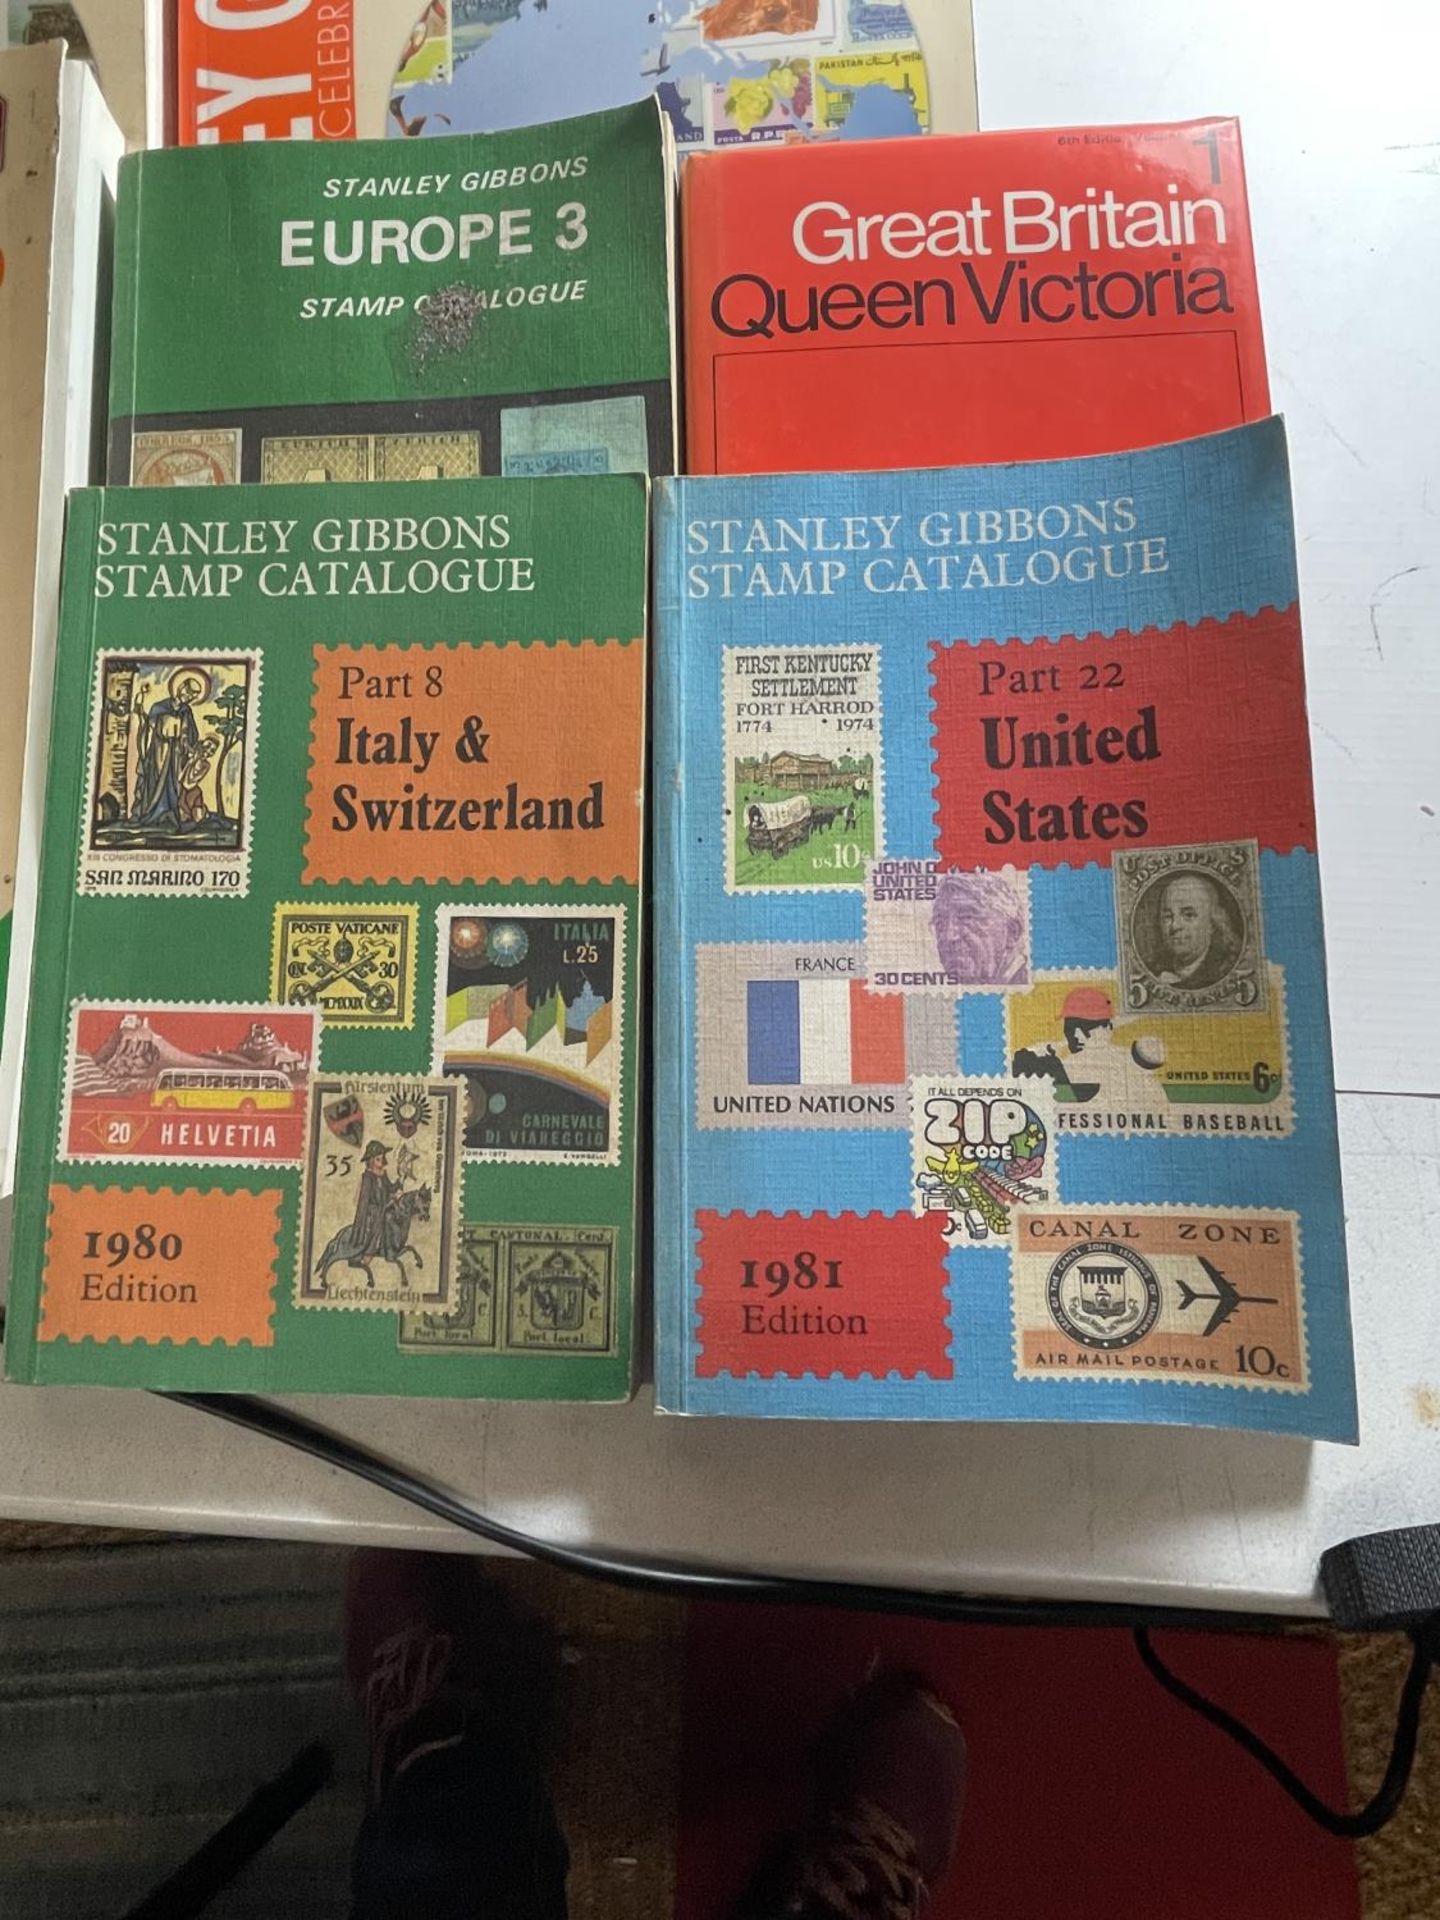 VOLUMES 1 - 5 OF THE 2006 EDITION OF STANLEY GIBBONS STAMP DIRECTORIES PLUS FOUR OTHER STAMP BOOKS - Bild 3 aus 5